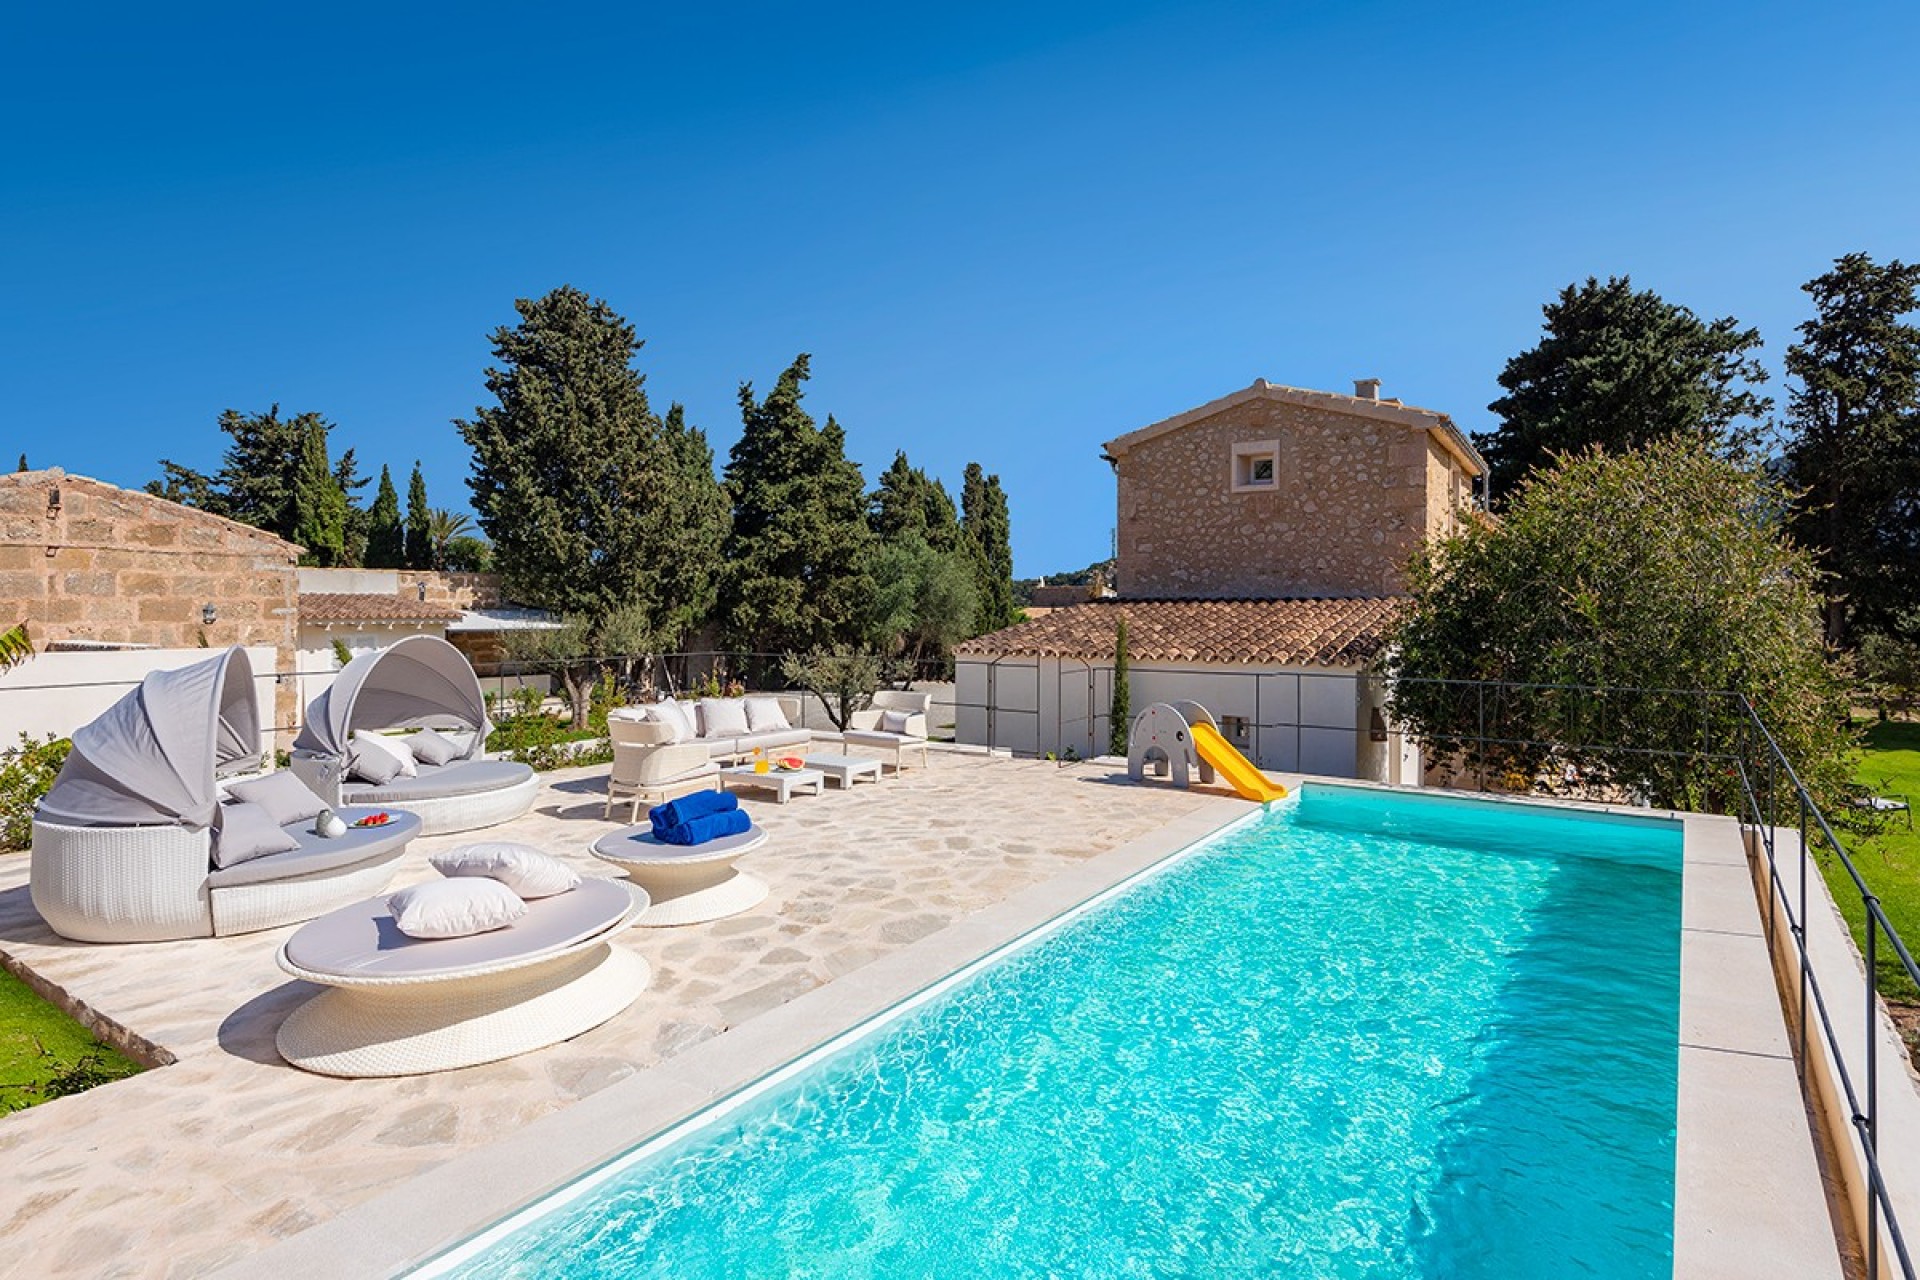 Superb rural retreat rental in Pollensa, Mallorca with private pool